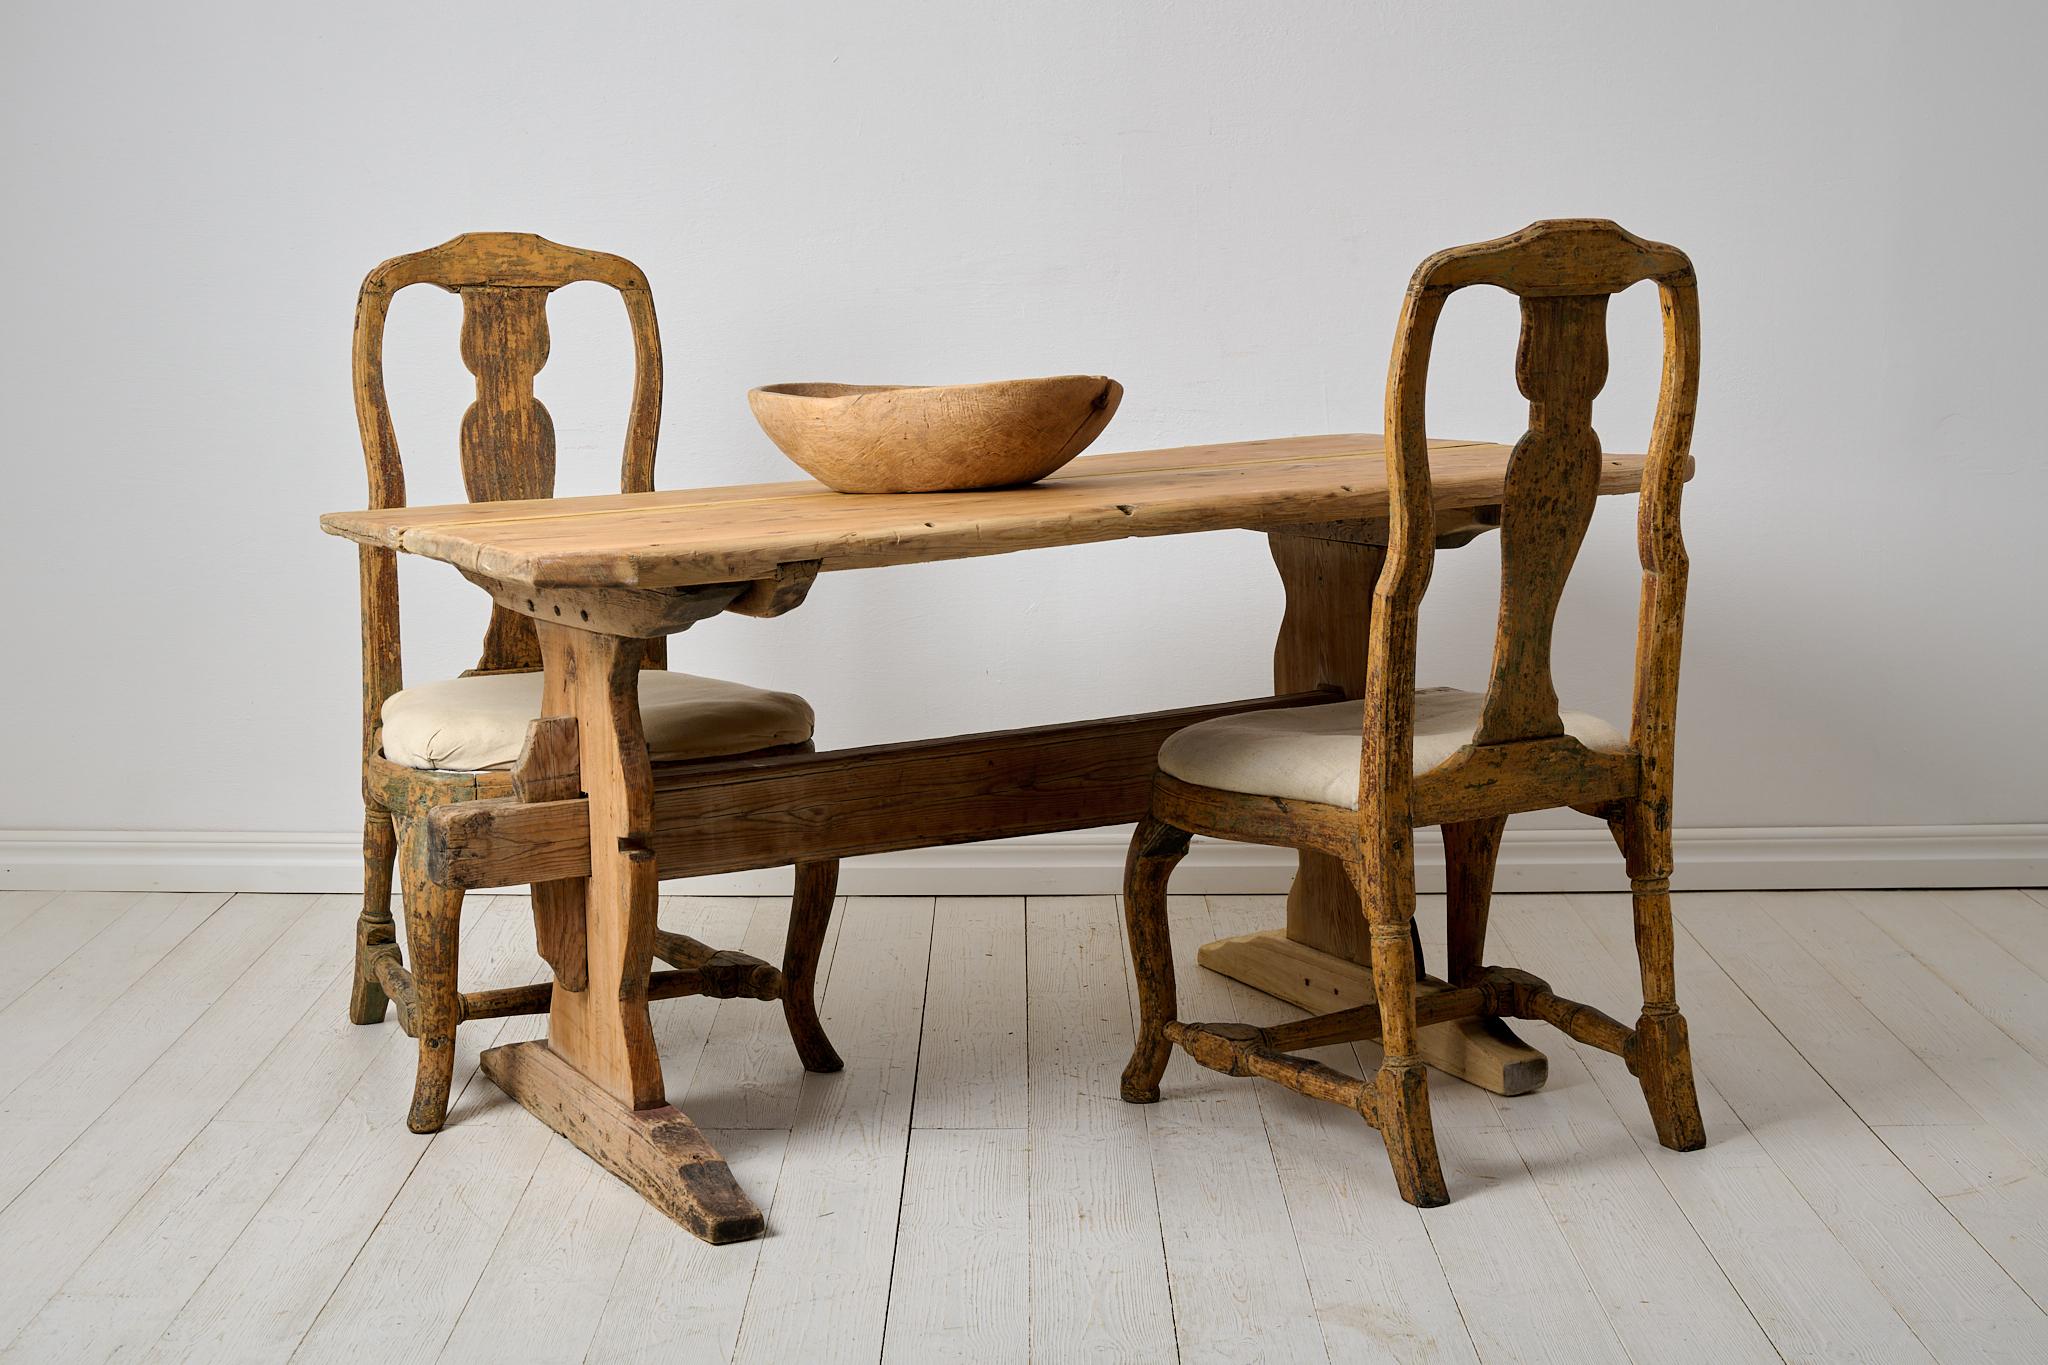 Antique Genuine Northern Swedish Folk Art Pine Dining or Work Trestle Table  In Good Condition For Sale In Kramfors, SE